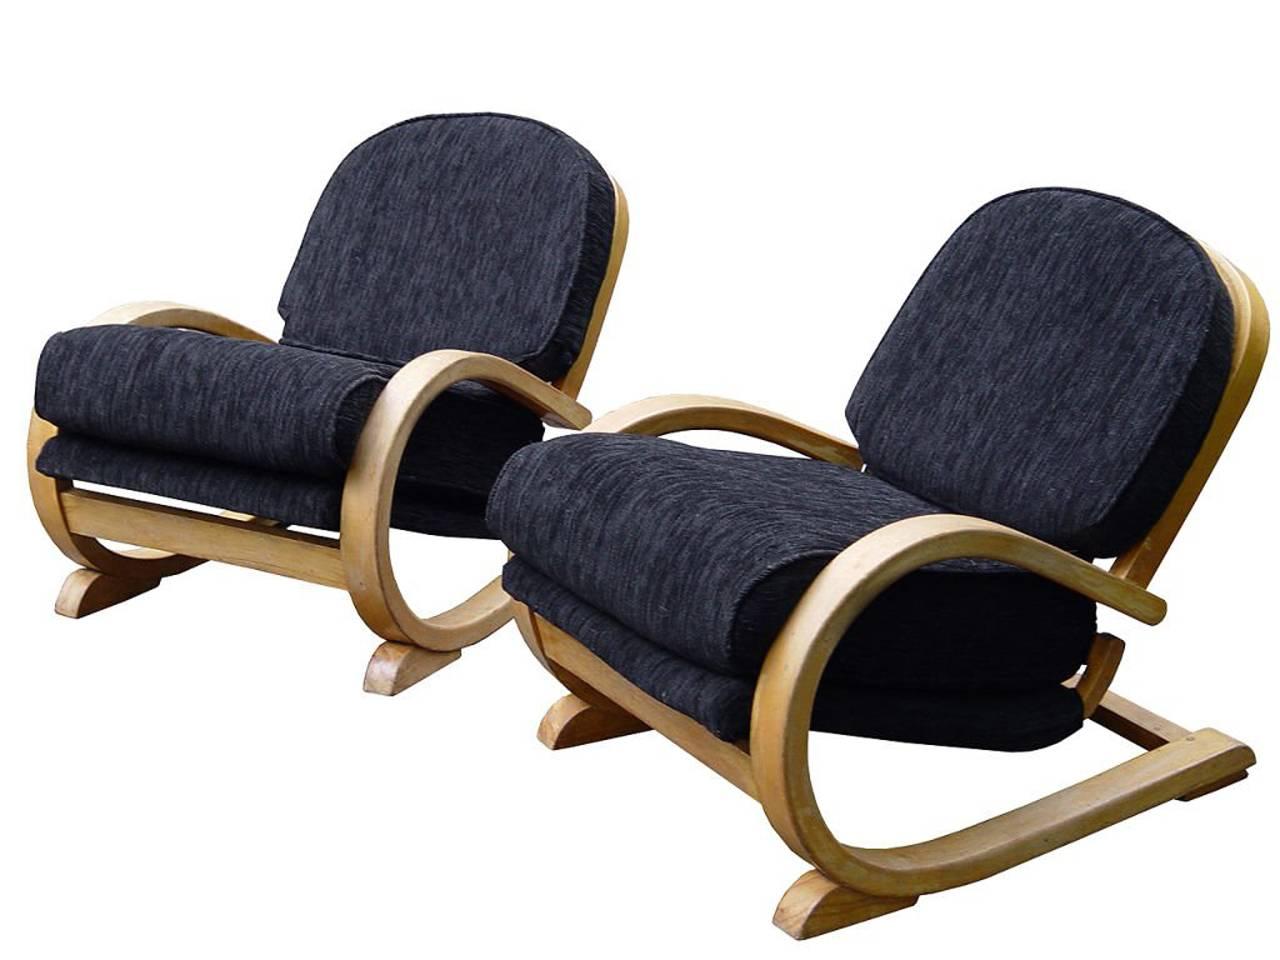 The modern design of these chairs were extreme for the 1930s. They sit very low and are quite comfortable. But you need to be under 40 to get out of them. They are striking as a pair and are unique in their posture and finish. The upholstery is new